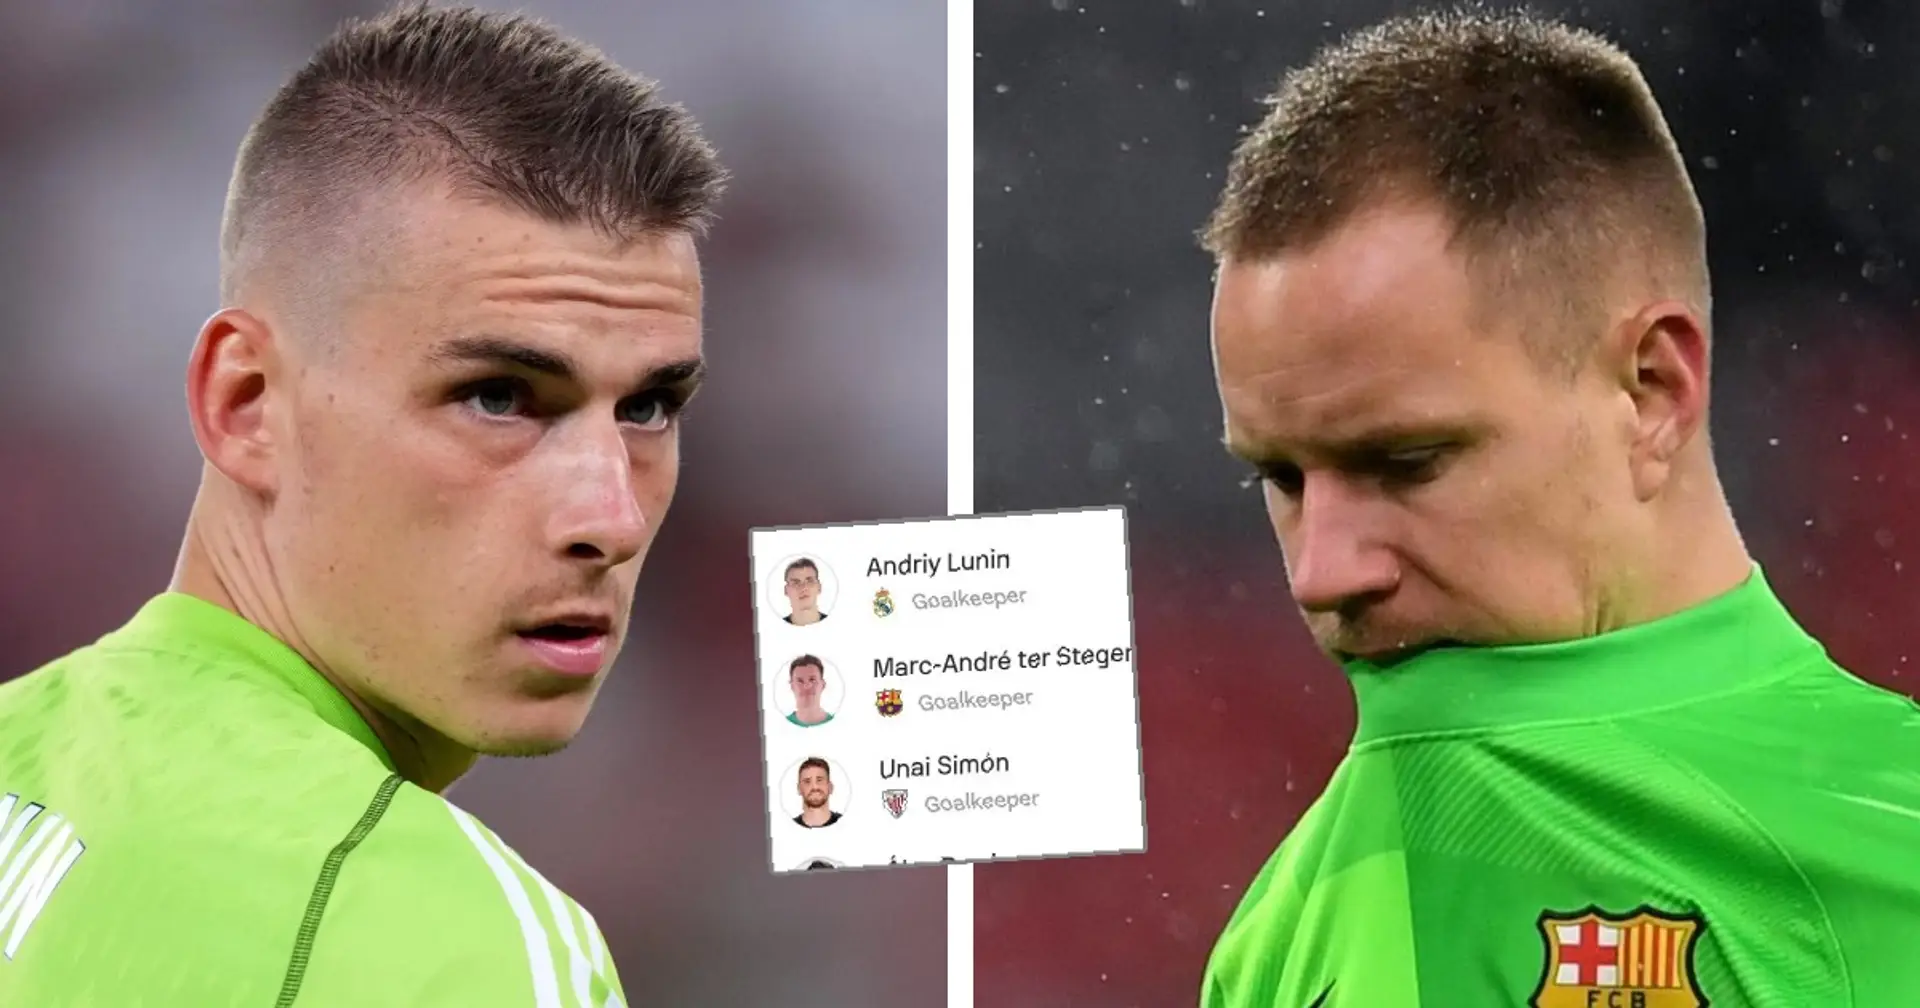 Busted: Barca fans exposed over false information on Ter Stegen - Lunin actually better   